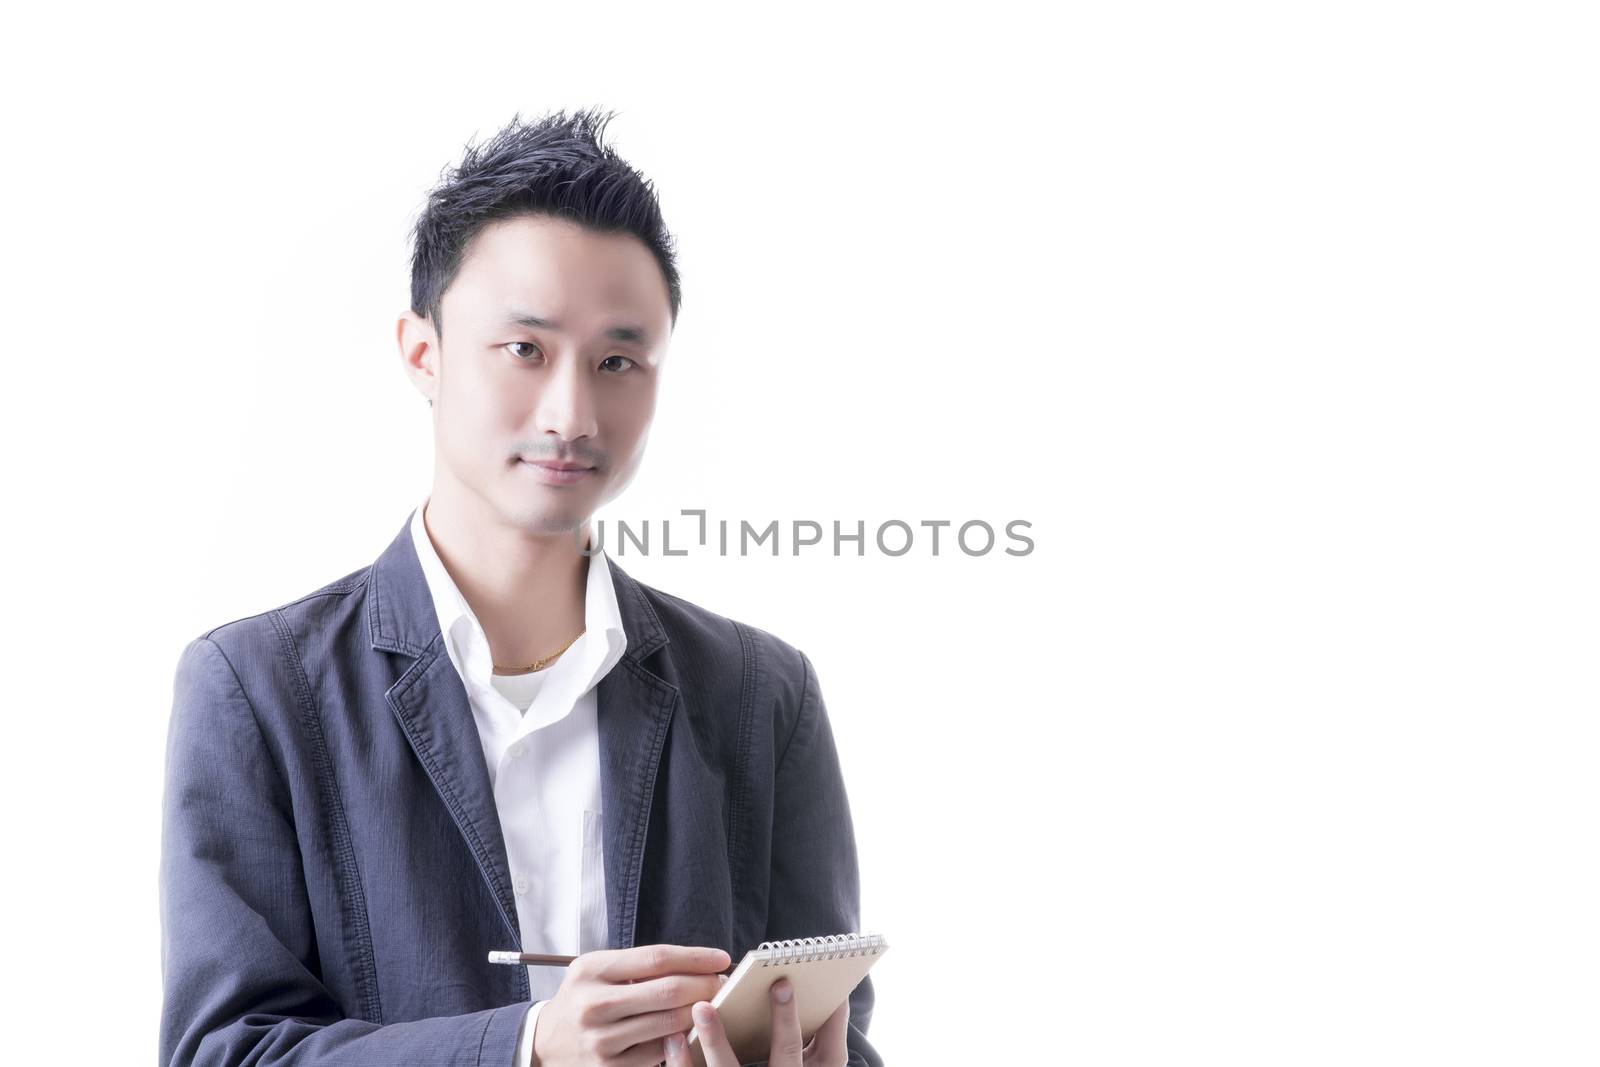 Asian man with document note in business office concept on white background